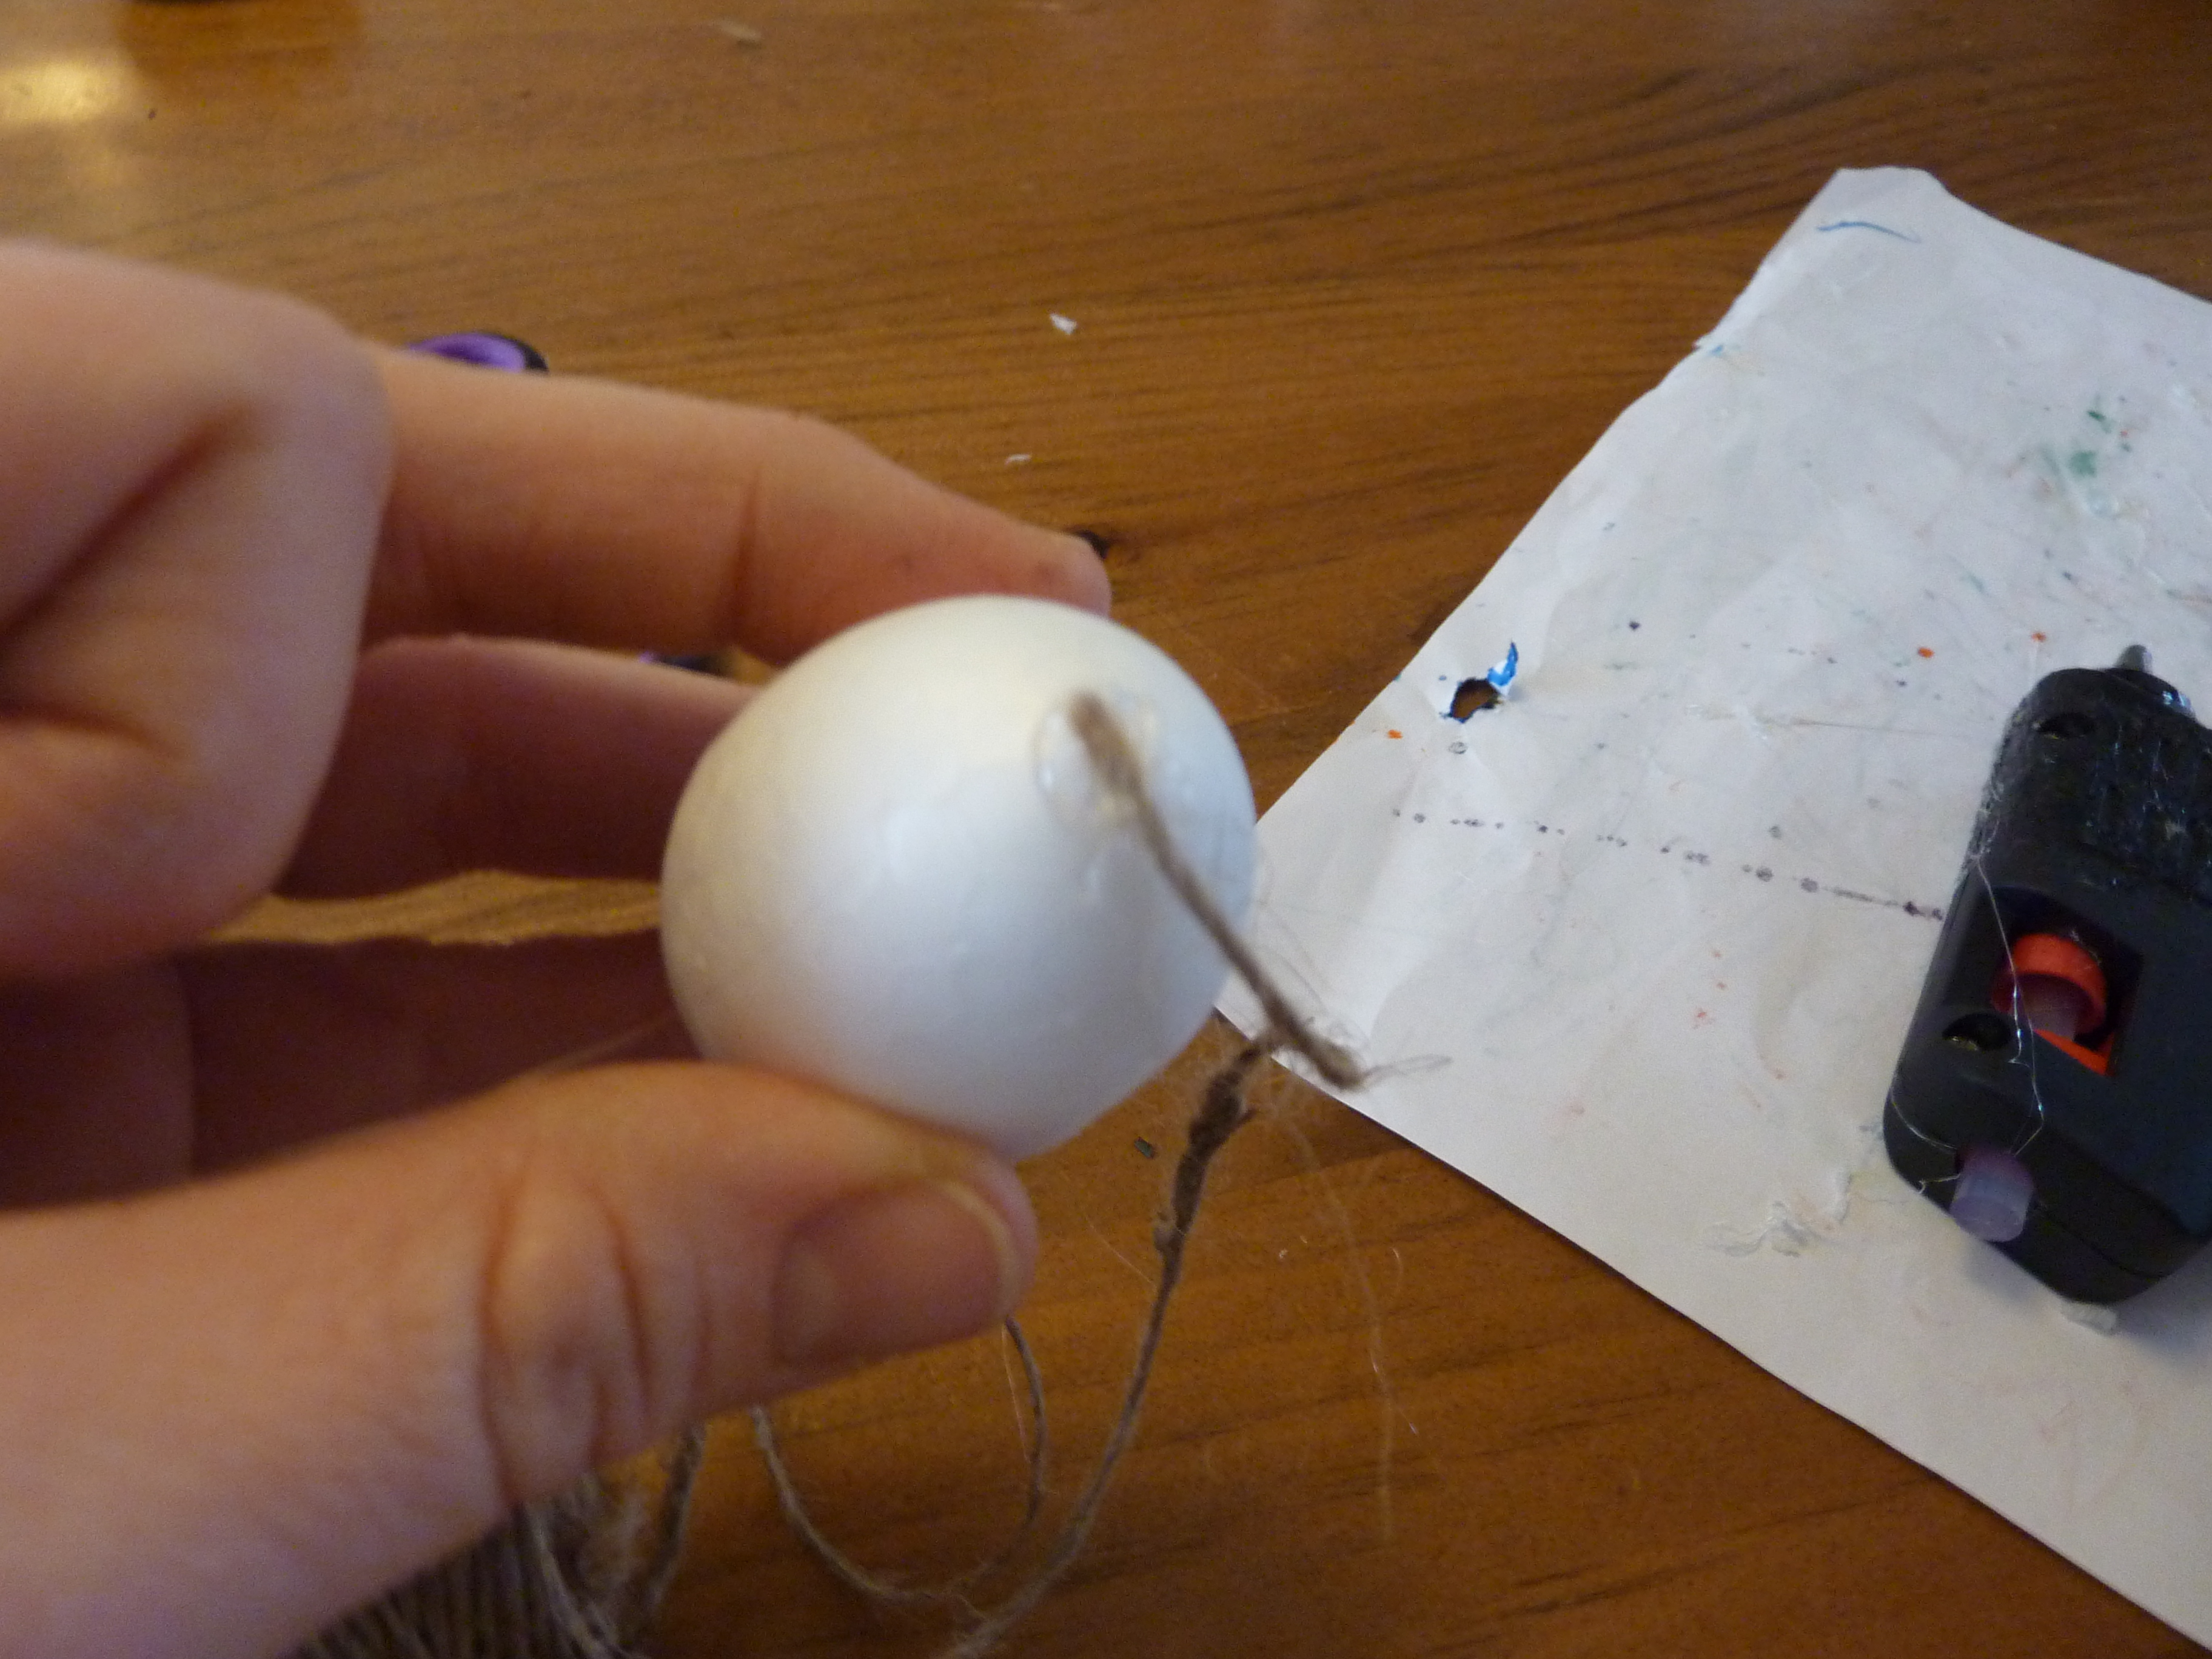 Using hot glue on the tip of the egg.